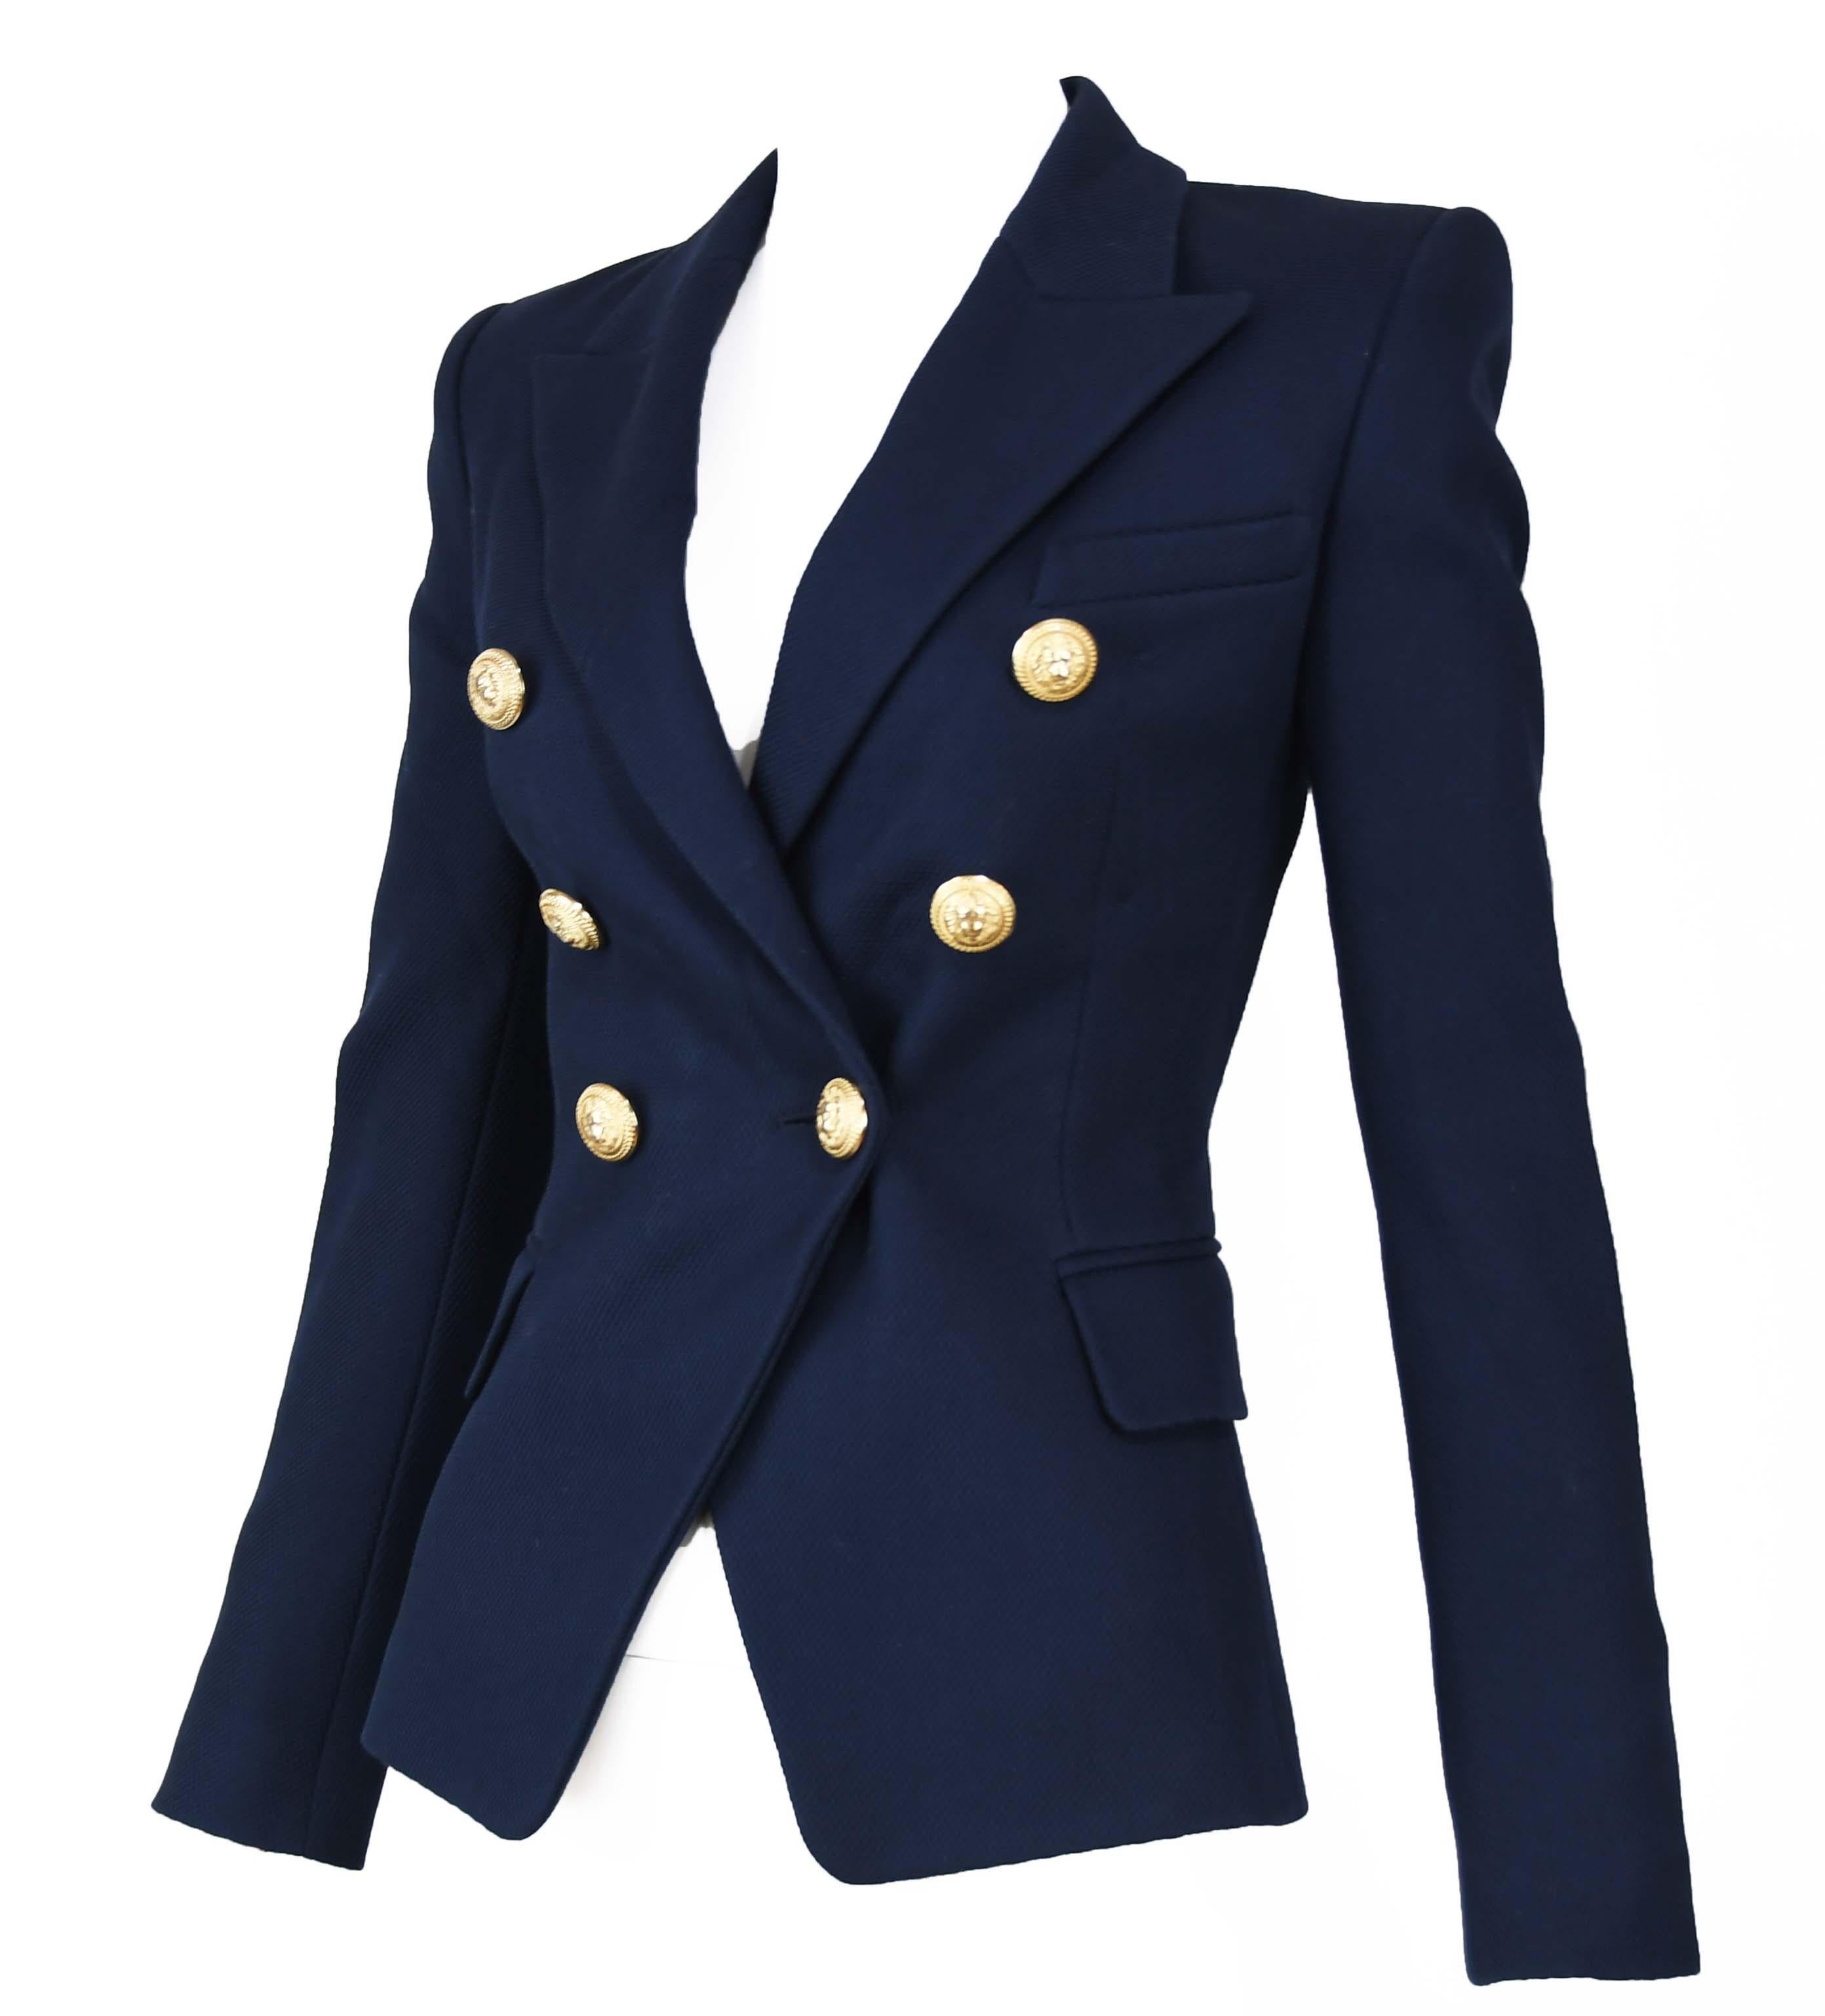 Balmain navy pique double breasted blazer with gold lion buttons.  

Size: FR 34

Condition: Brand new with original tags

Composition: 100% cotton / (lining) 52% viscose, 48% cotton

Care: Dry clean only

Made in Slovaqia